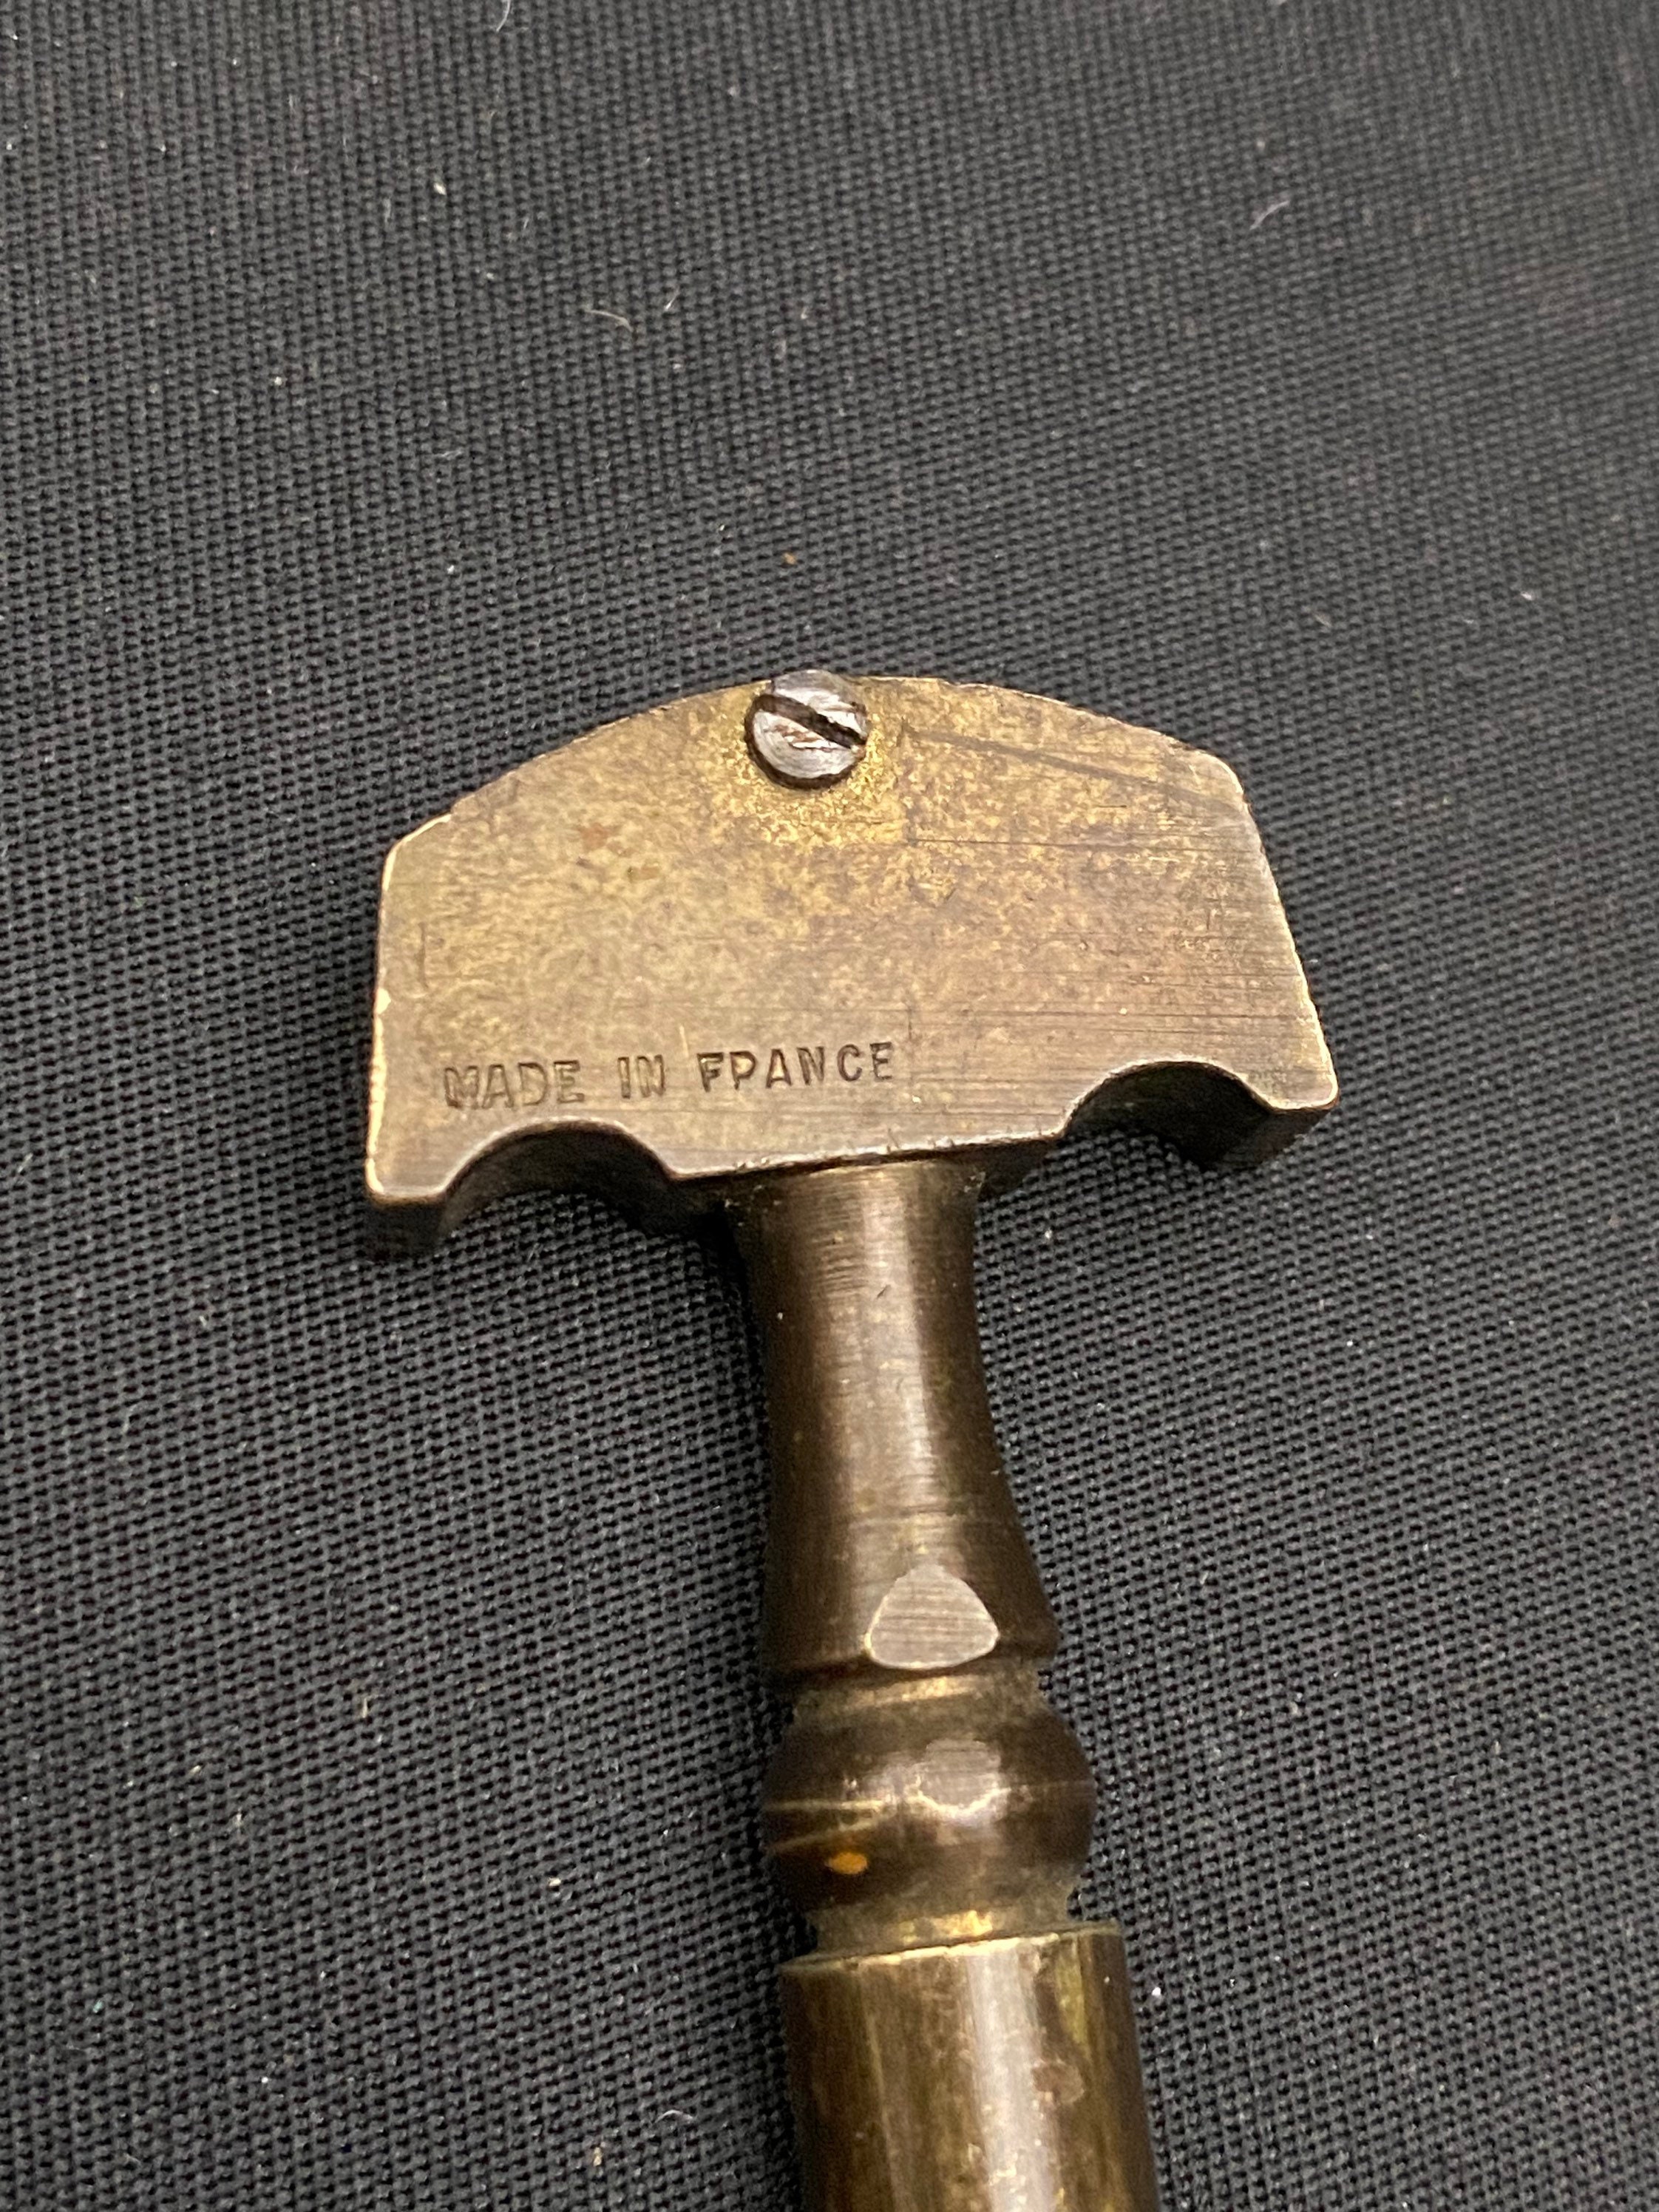 Old Vintage Glass Cutter Tool from Germany - Universal